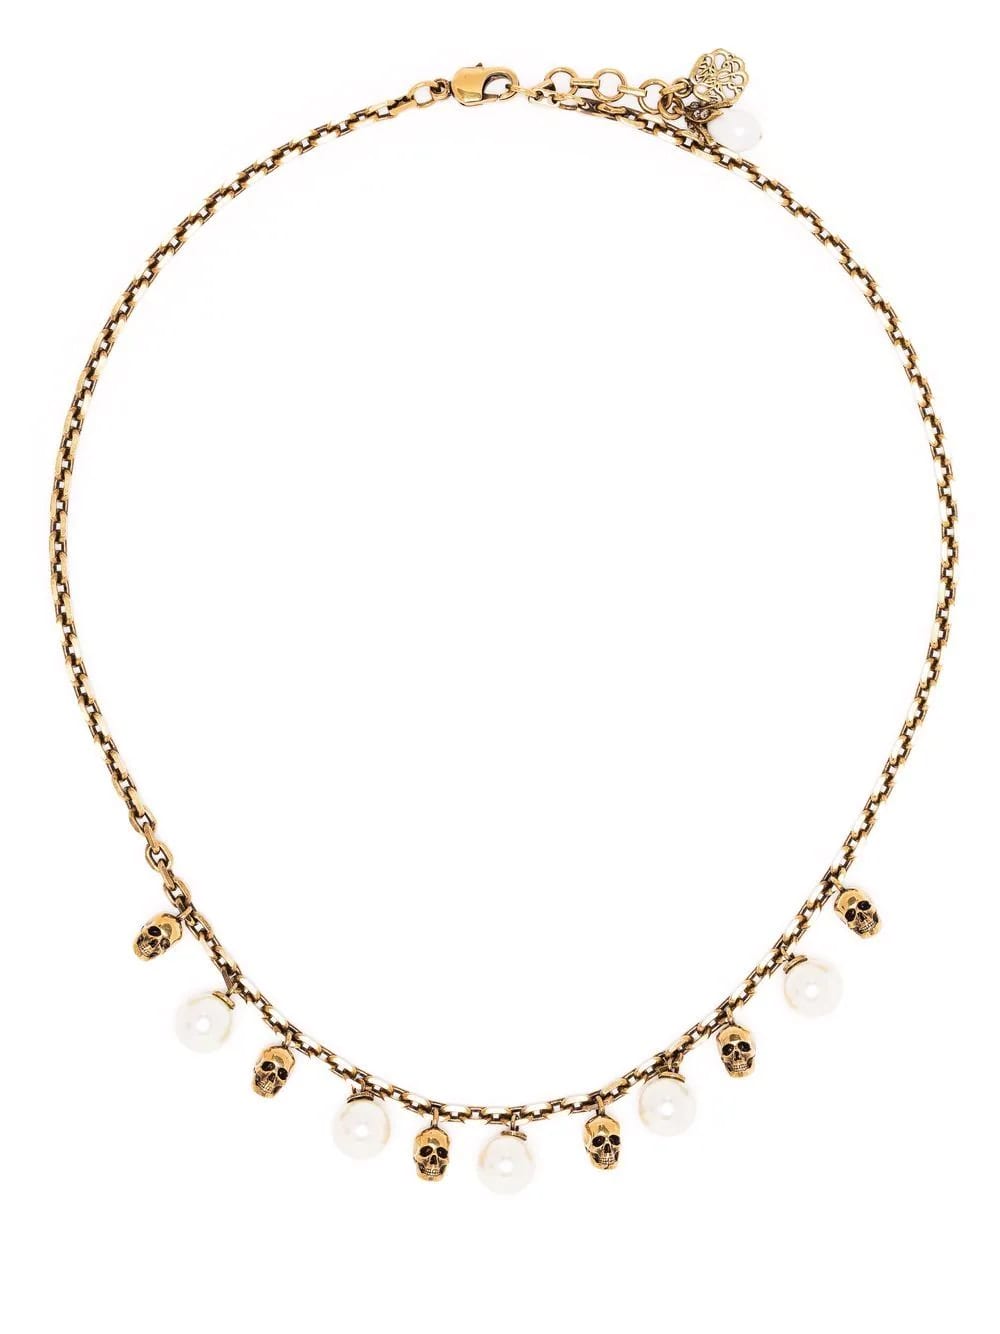 Alexander Mcqueen Pearly Skull Necklace In Antiqued Gold